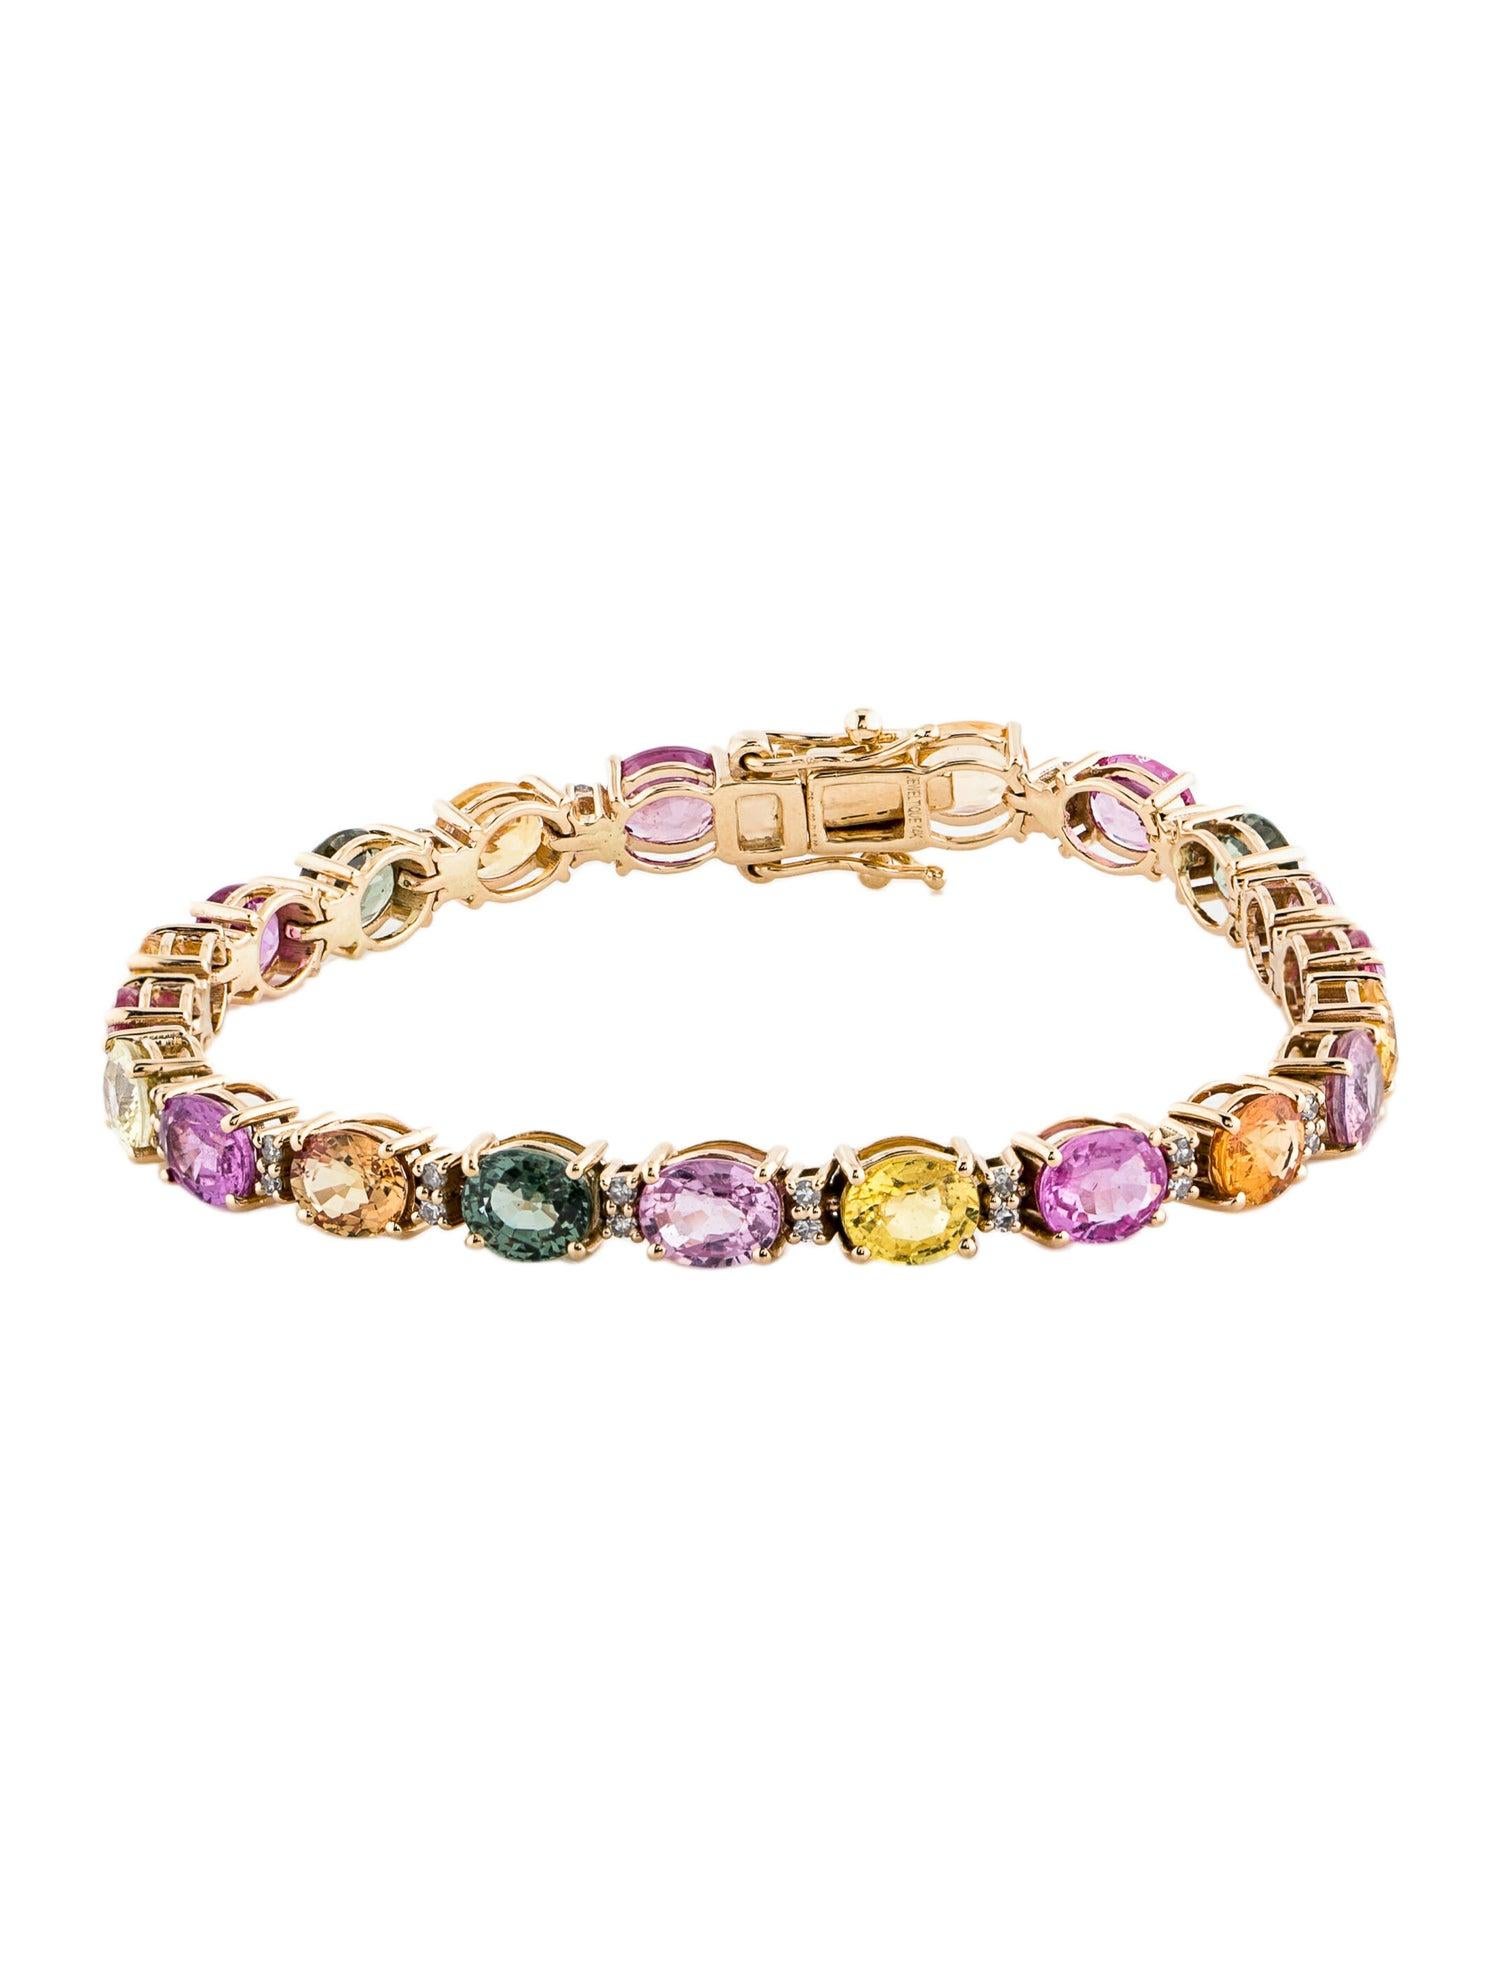 Elegance meets a vibrant burst of color in our Rainbow Symphony Multi Sapphire and Diamond Bracelet. This exquisite piece from Jeweltique's collection celebrates the enchanting beauty and harmony of a rainbow through its stunning array of